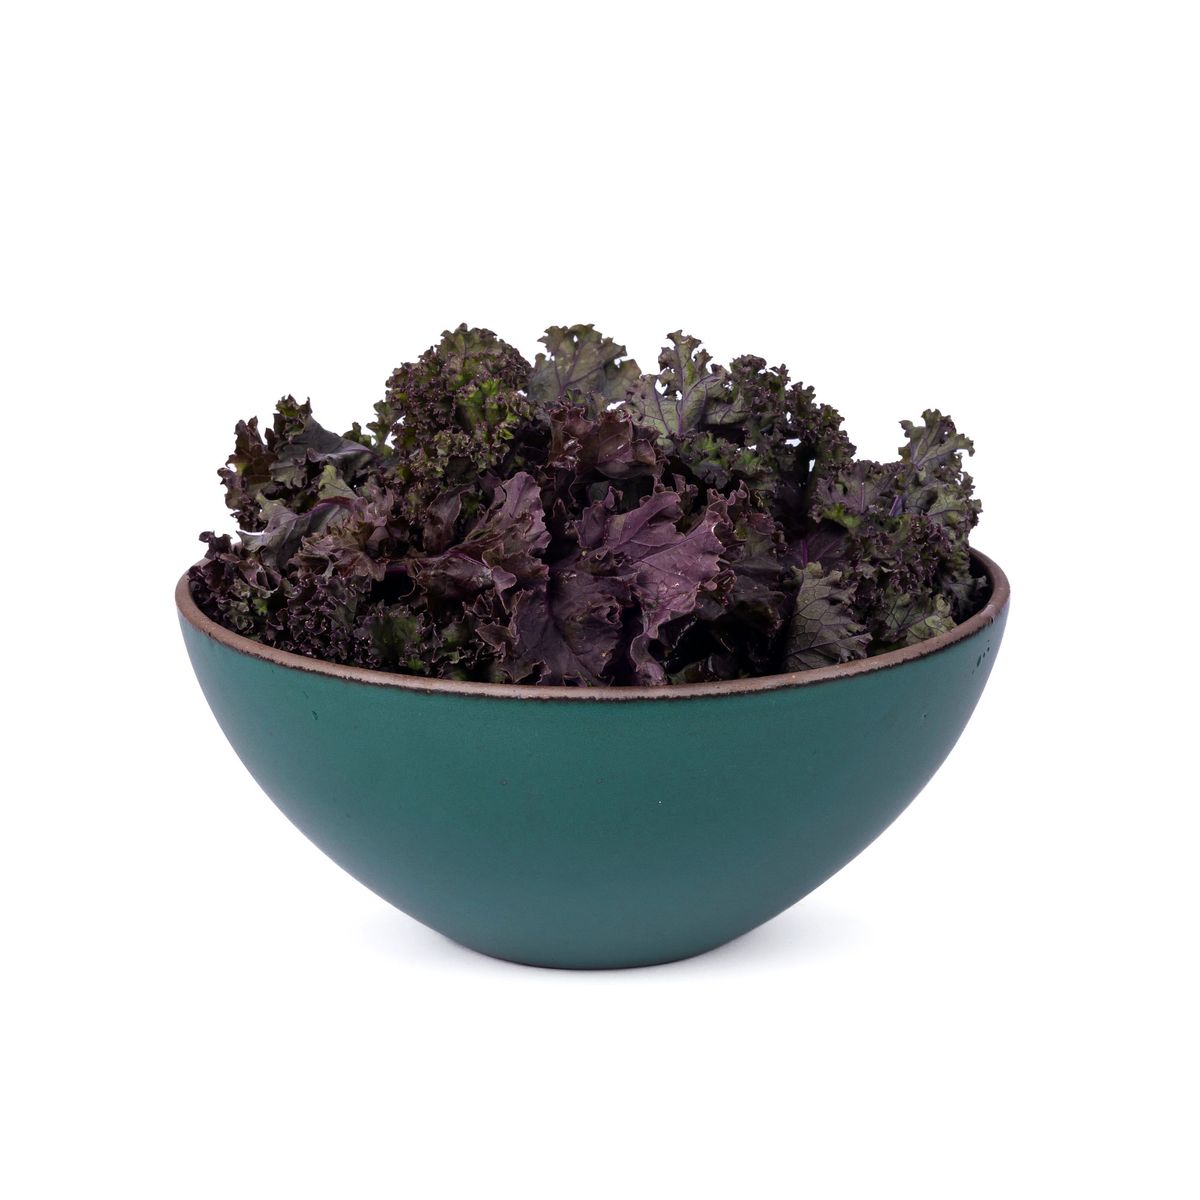 Purple lettuce in a large ceramic mixing bowl in a deep dark teal color featuring iron speckles and an unglazed rim